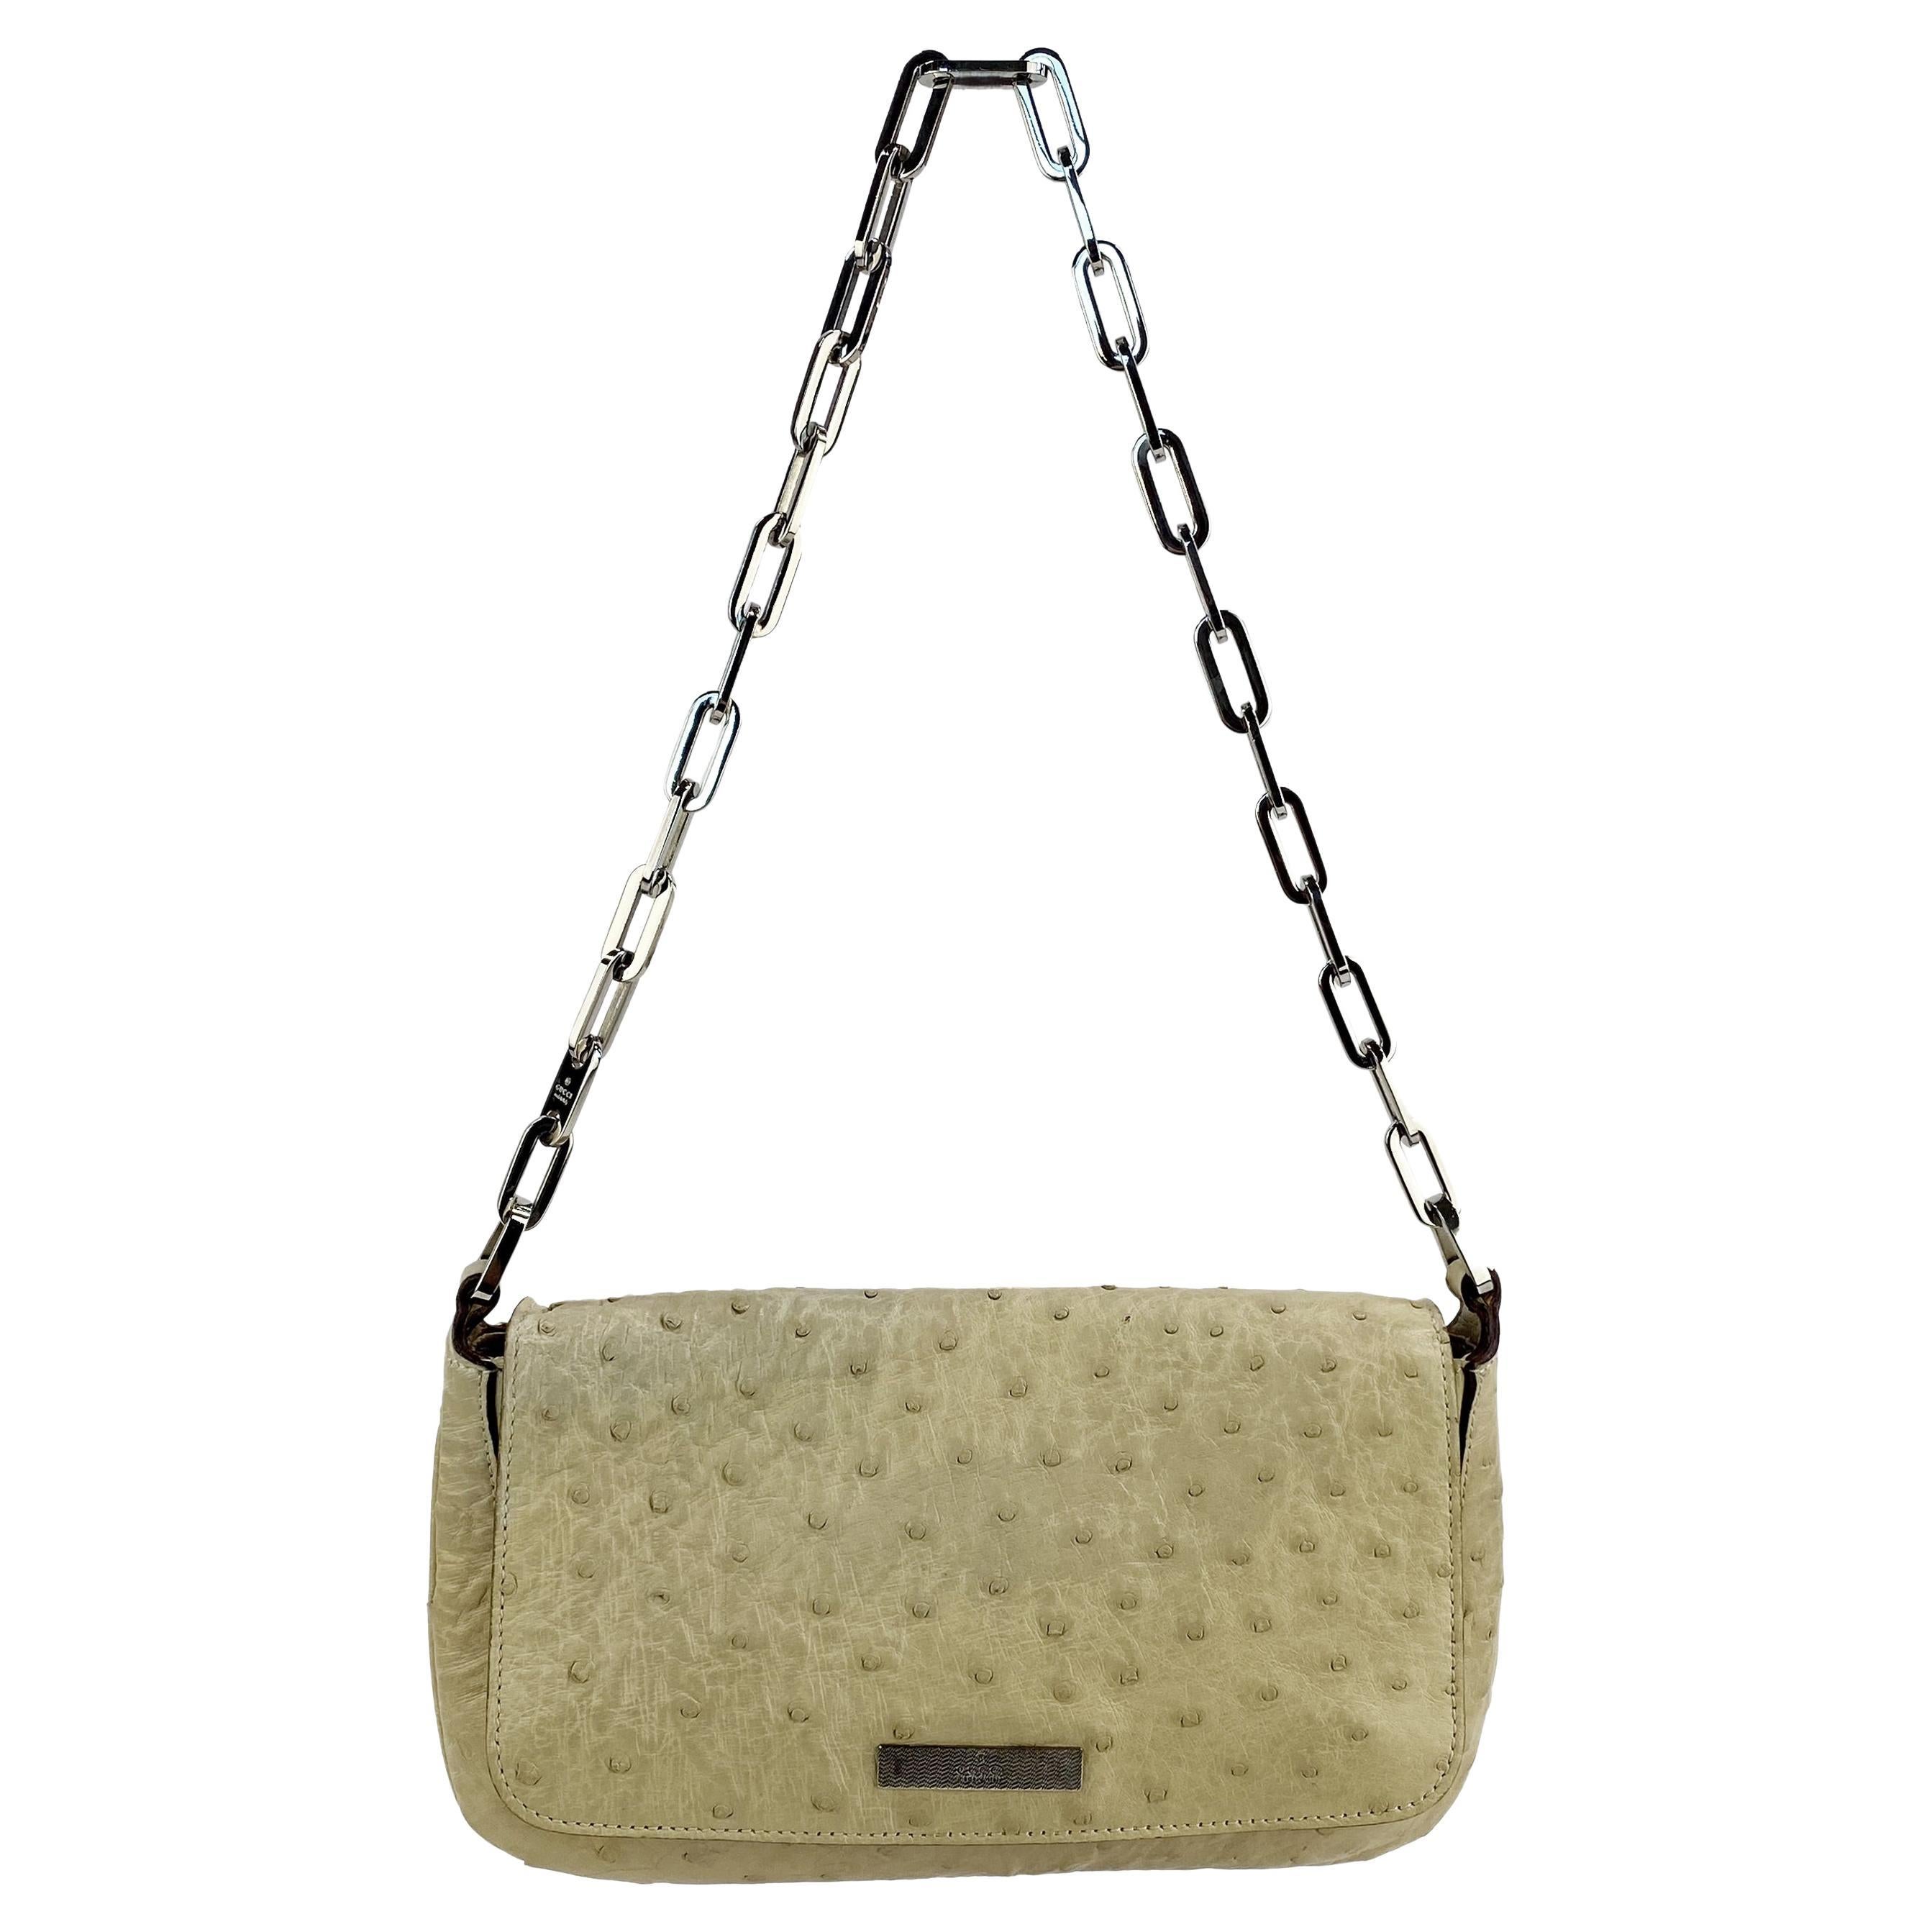 S/S 2000 Gucci by Tom Ford Cream Ostrich Chain Flap Shoulder Bag For Sale